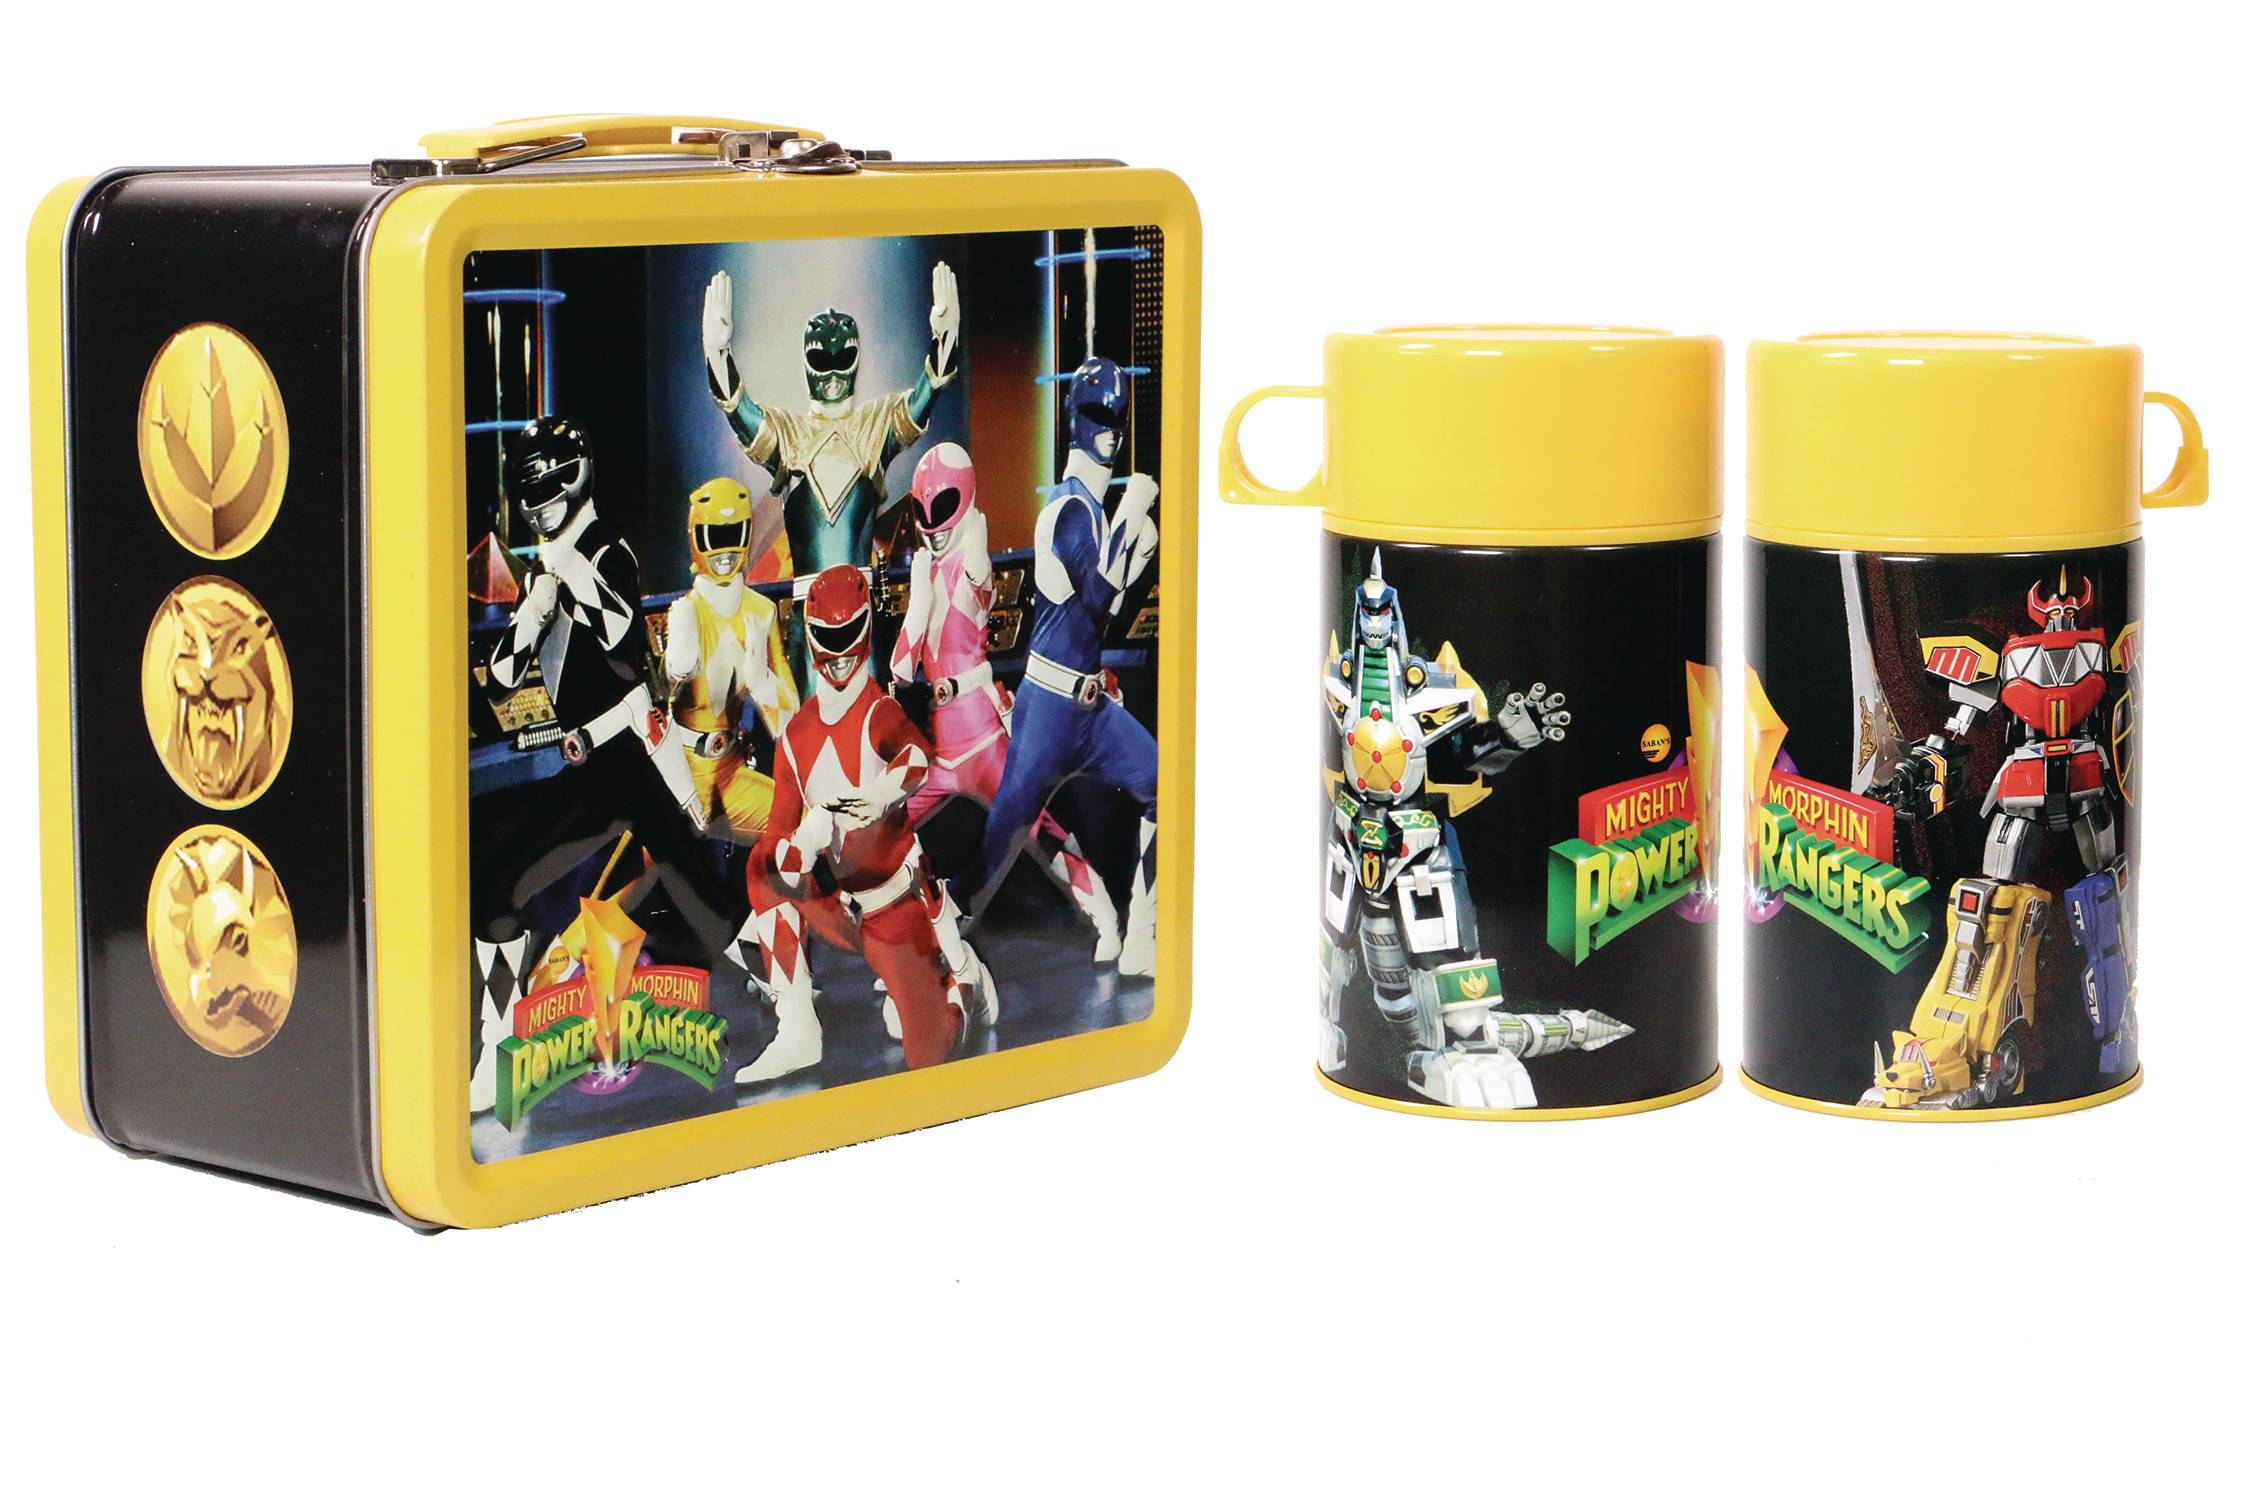 TIN TITANS POWER RANGERS PX LUNCHBOX & BEV CONTAINER